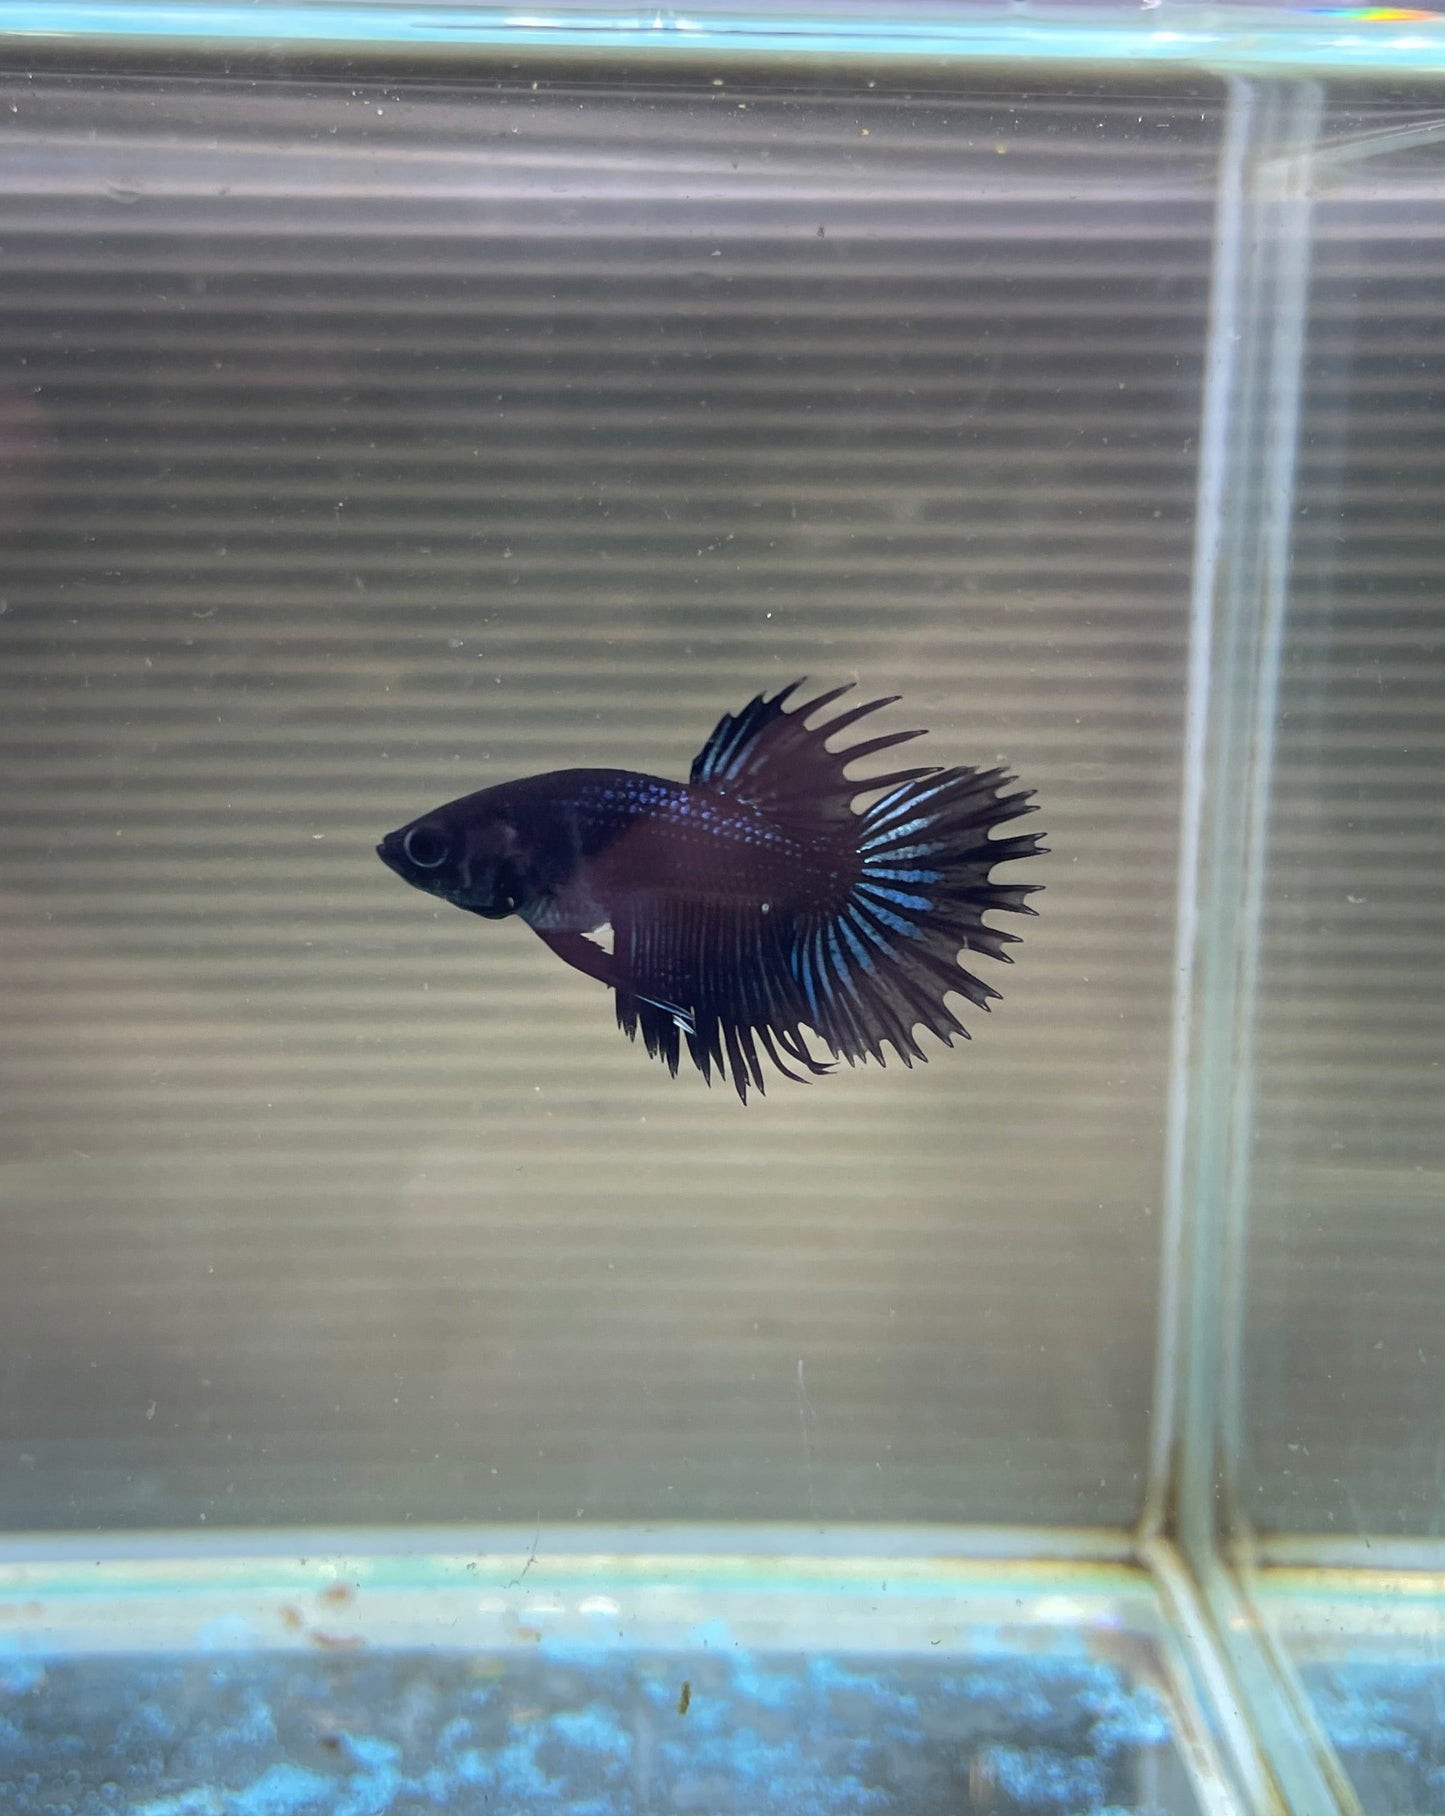 Black Copper Crowntail